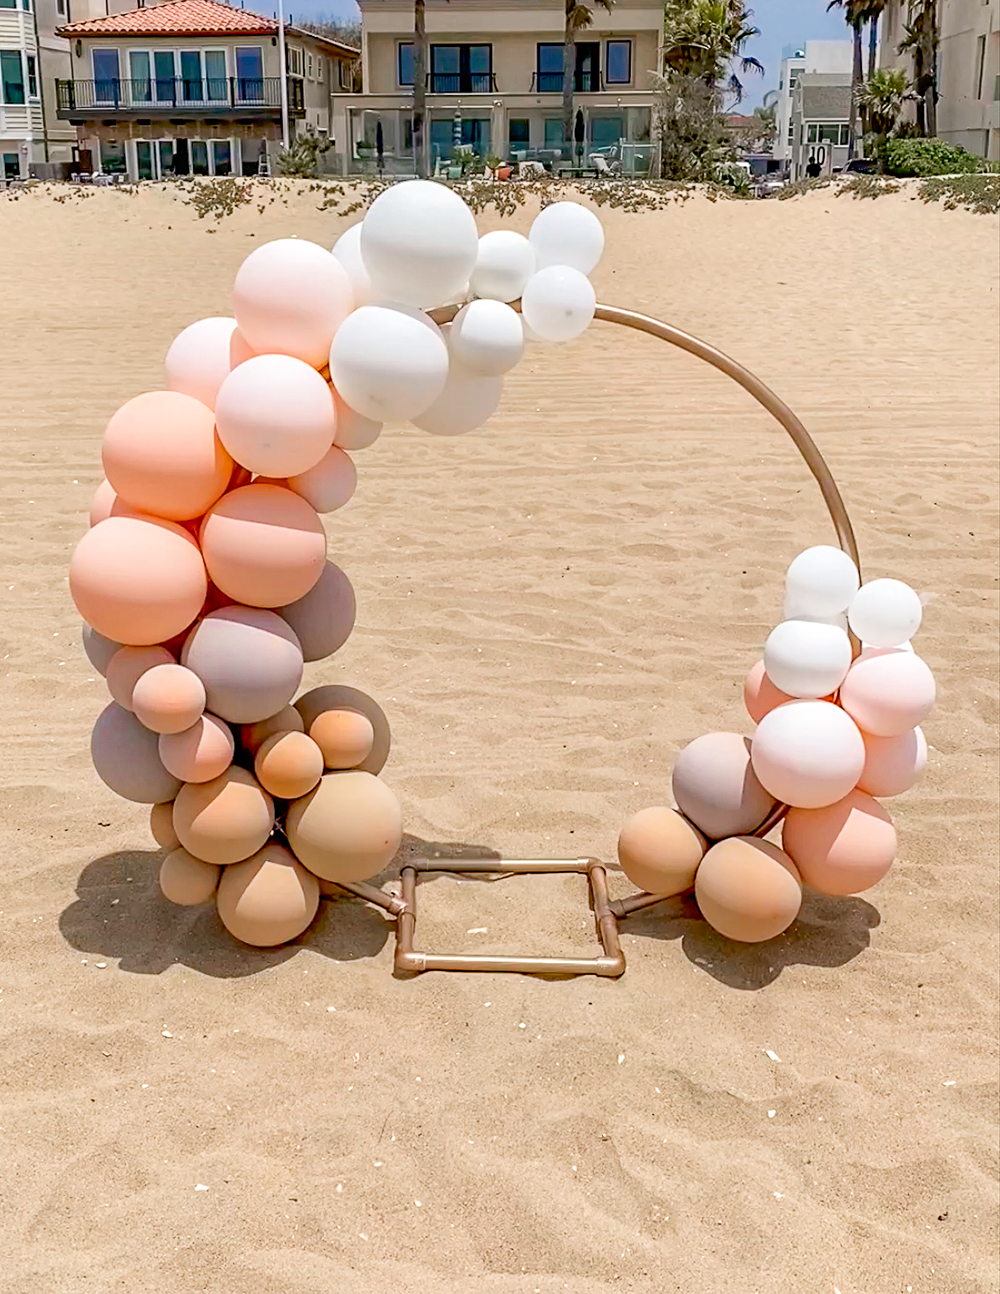 DIY Tutorial: How to Make a Balloon Arch - The Wedding Community